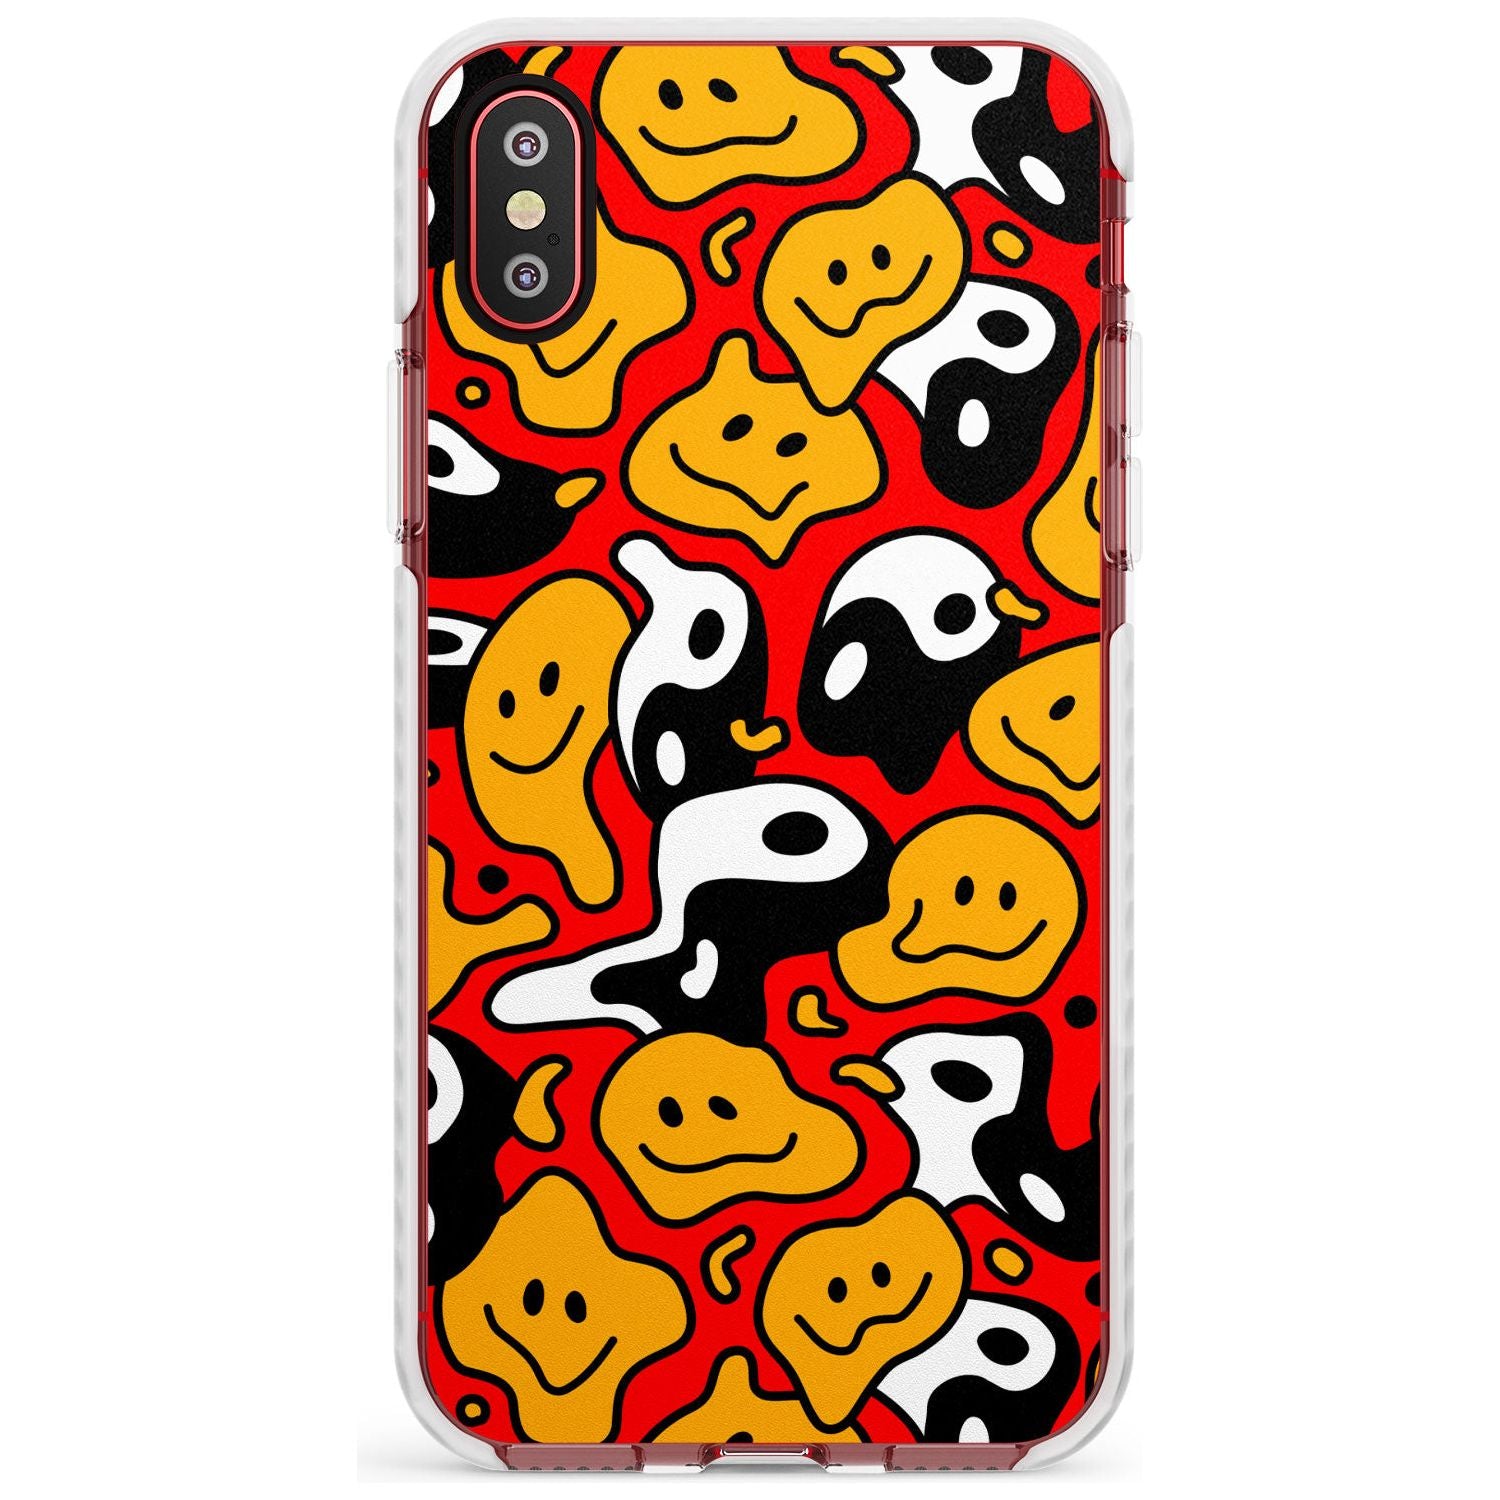 Yin Yang Acid Face Impact Phone Case for iPhone X XS Max XR